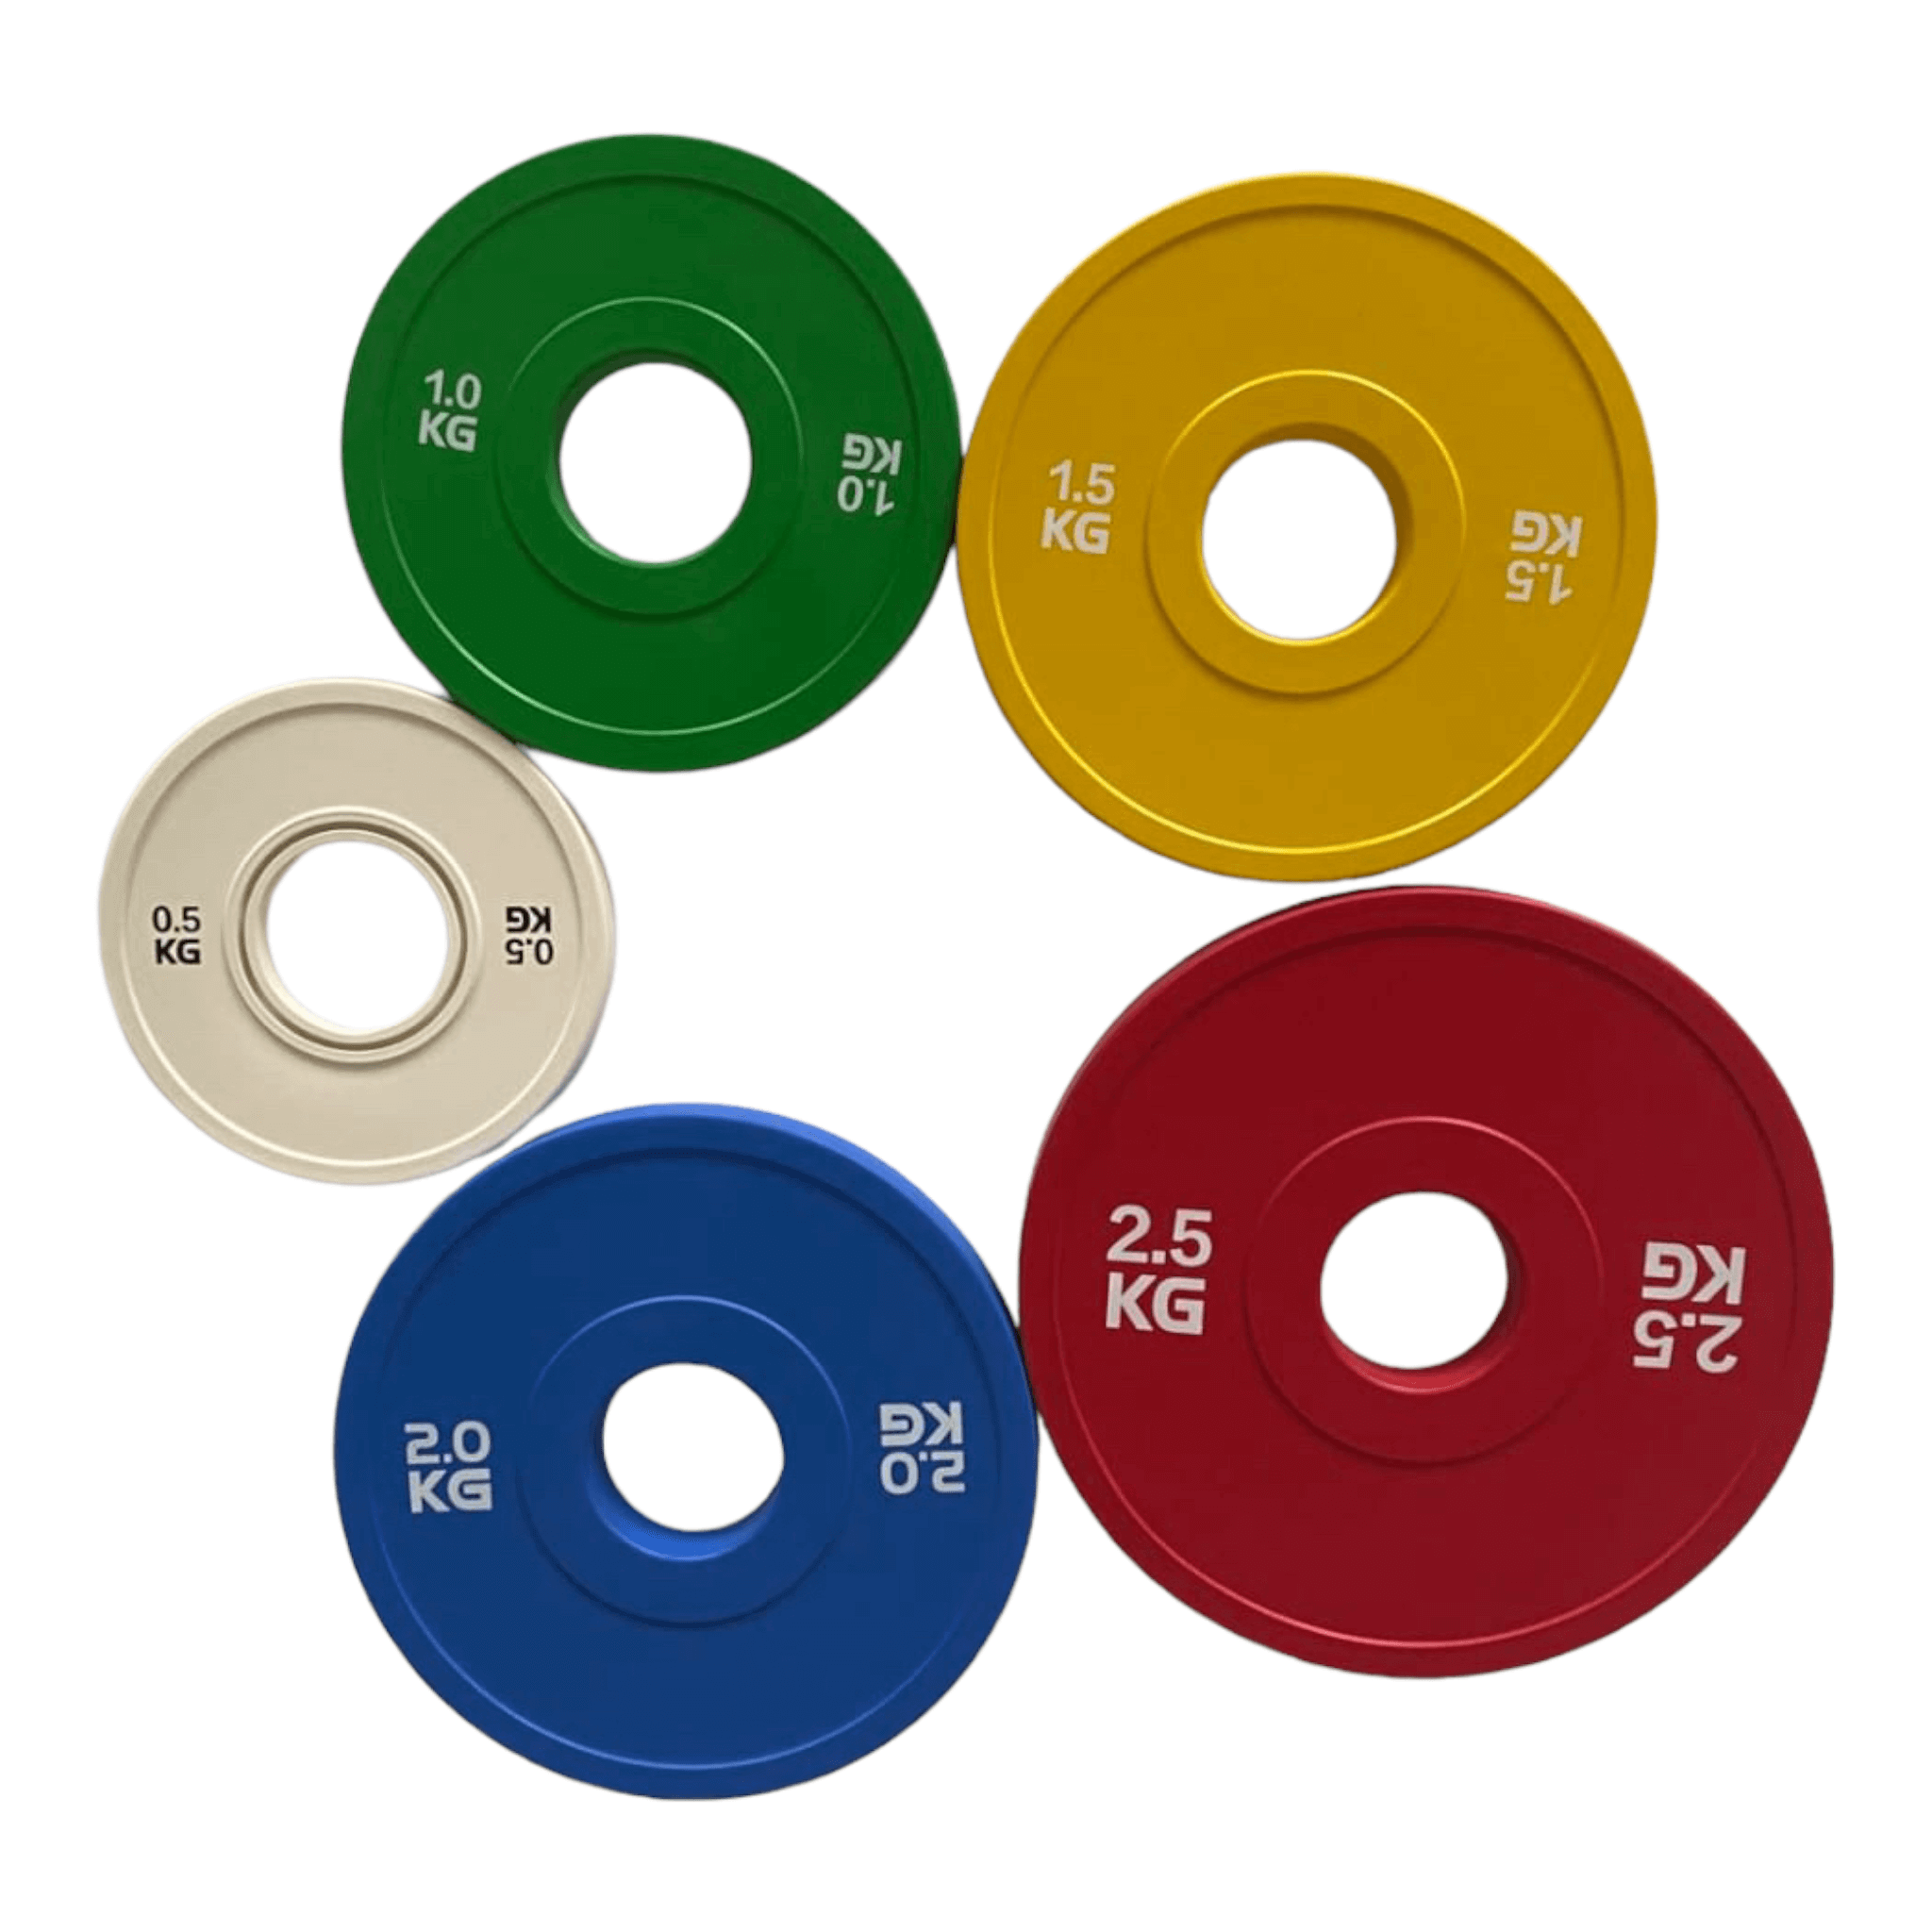 1.5kg Fractional Change Plates Rubber Weight Plates Pair | Fractional Change Plates | INSOURCE